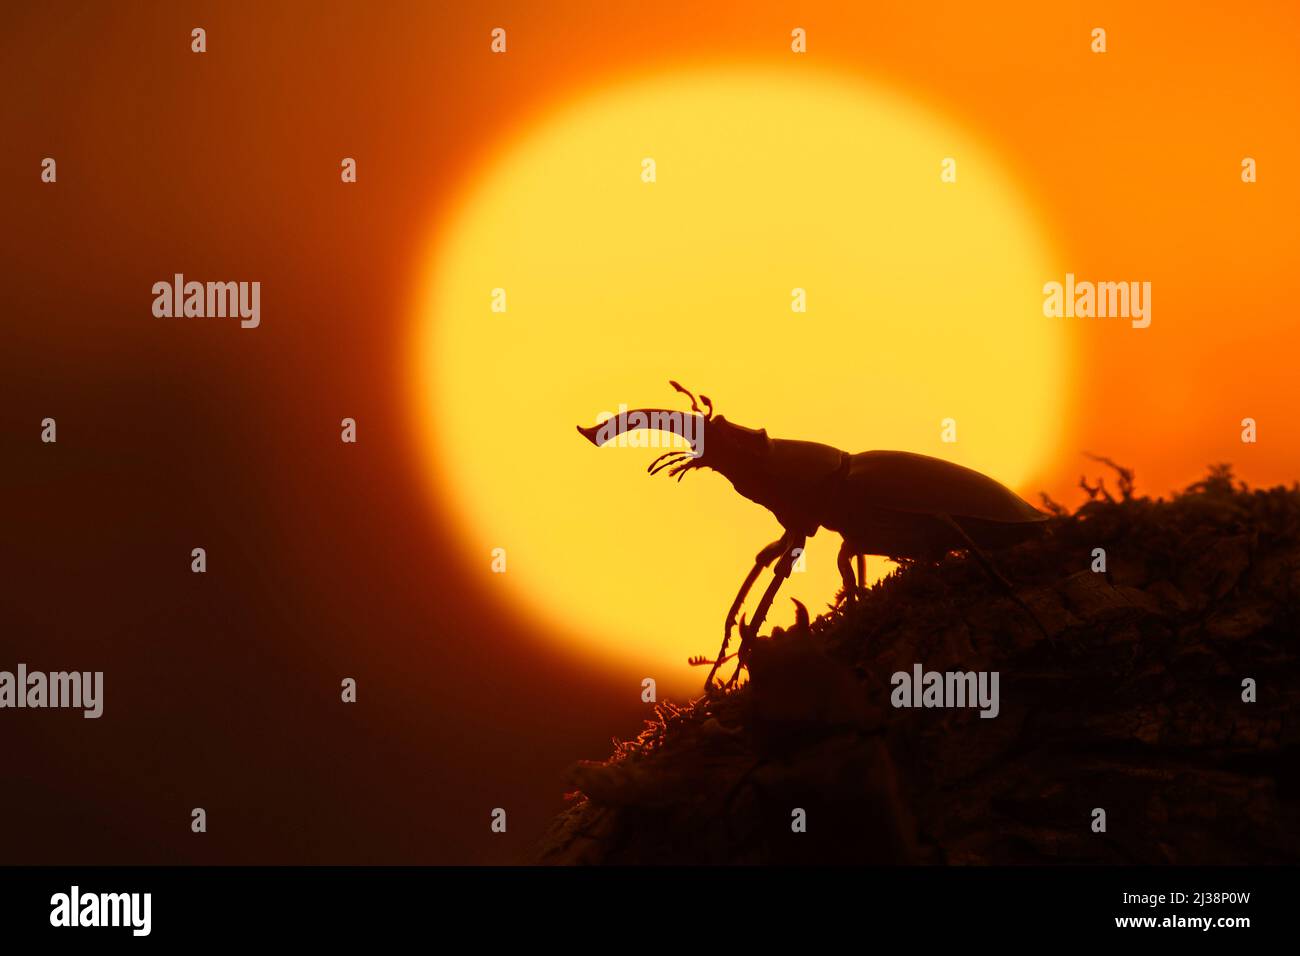 European stag beetle male (Lucanus cervus) with large mandibles / jaws on tree trunk silhouetted against setting sun at sunset in summer Stock Photo